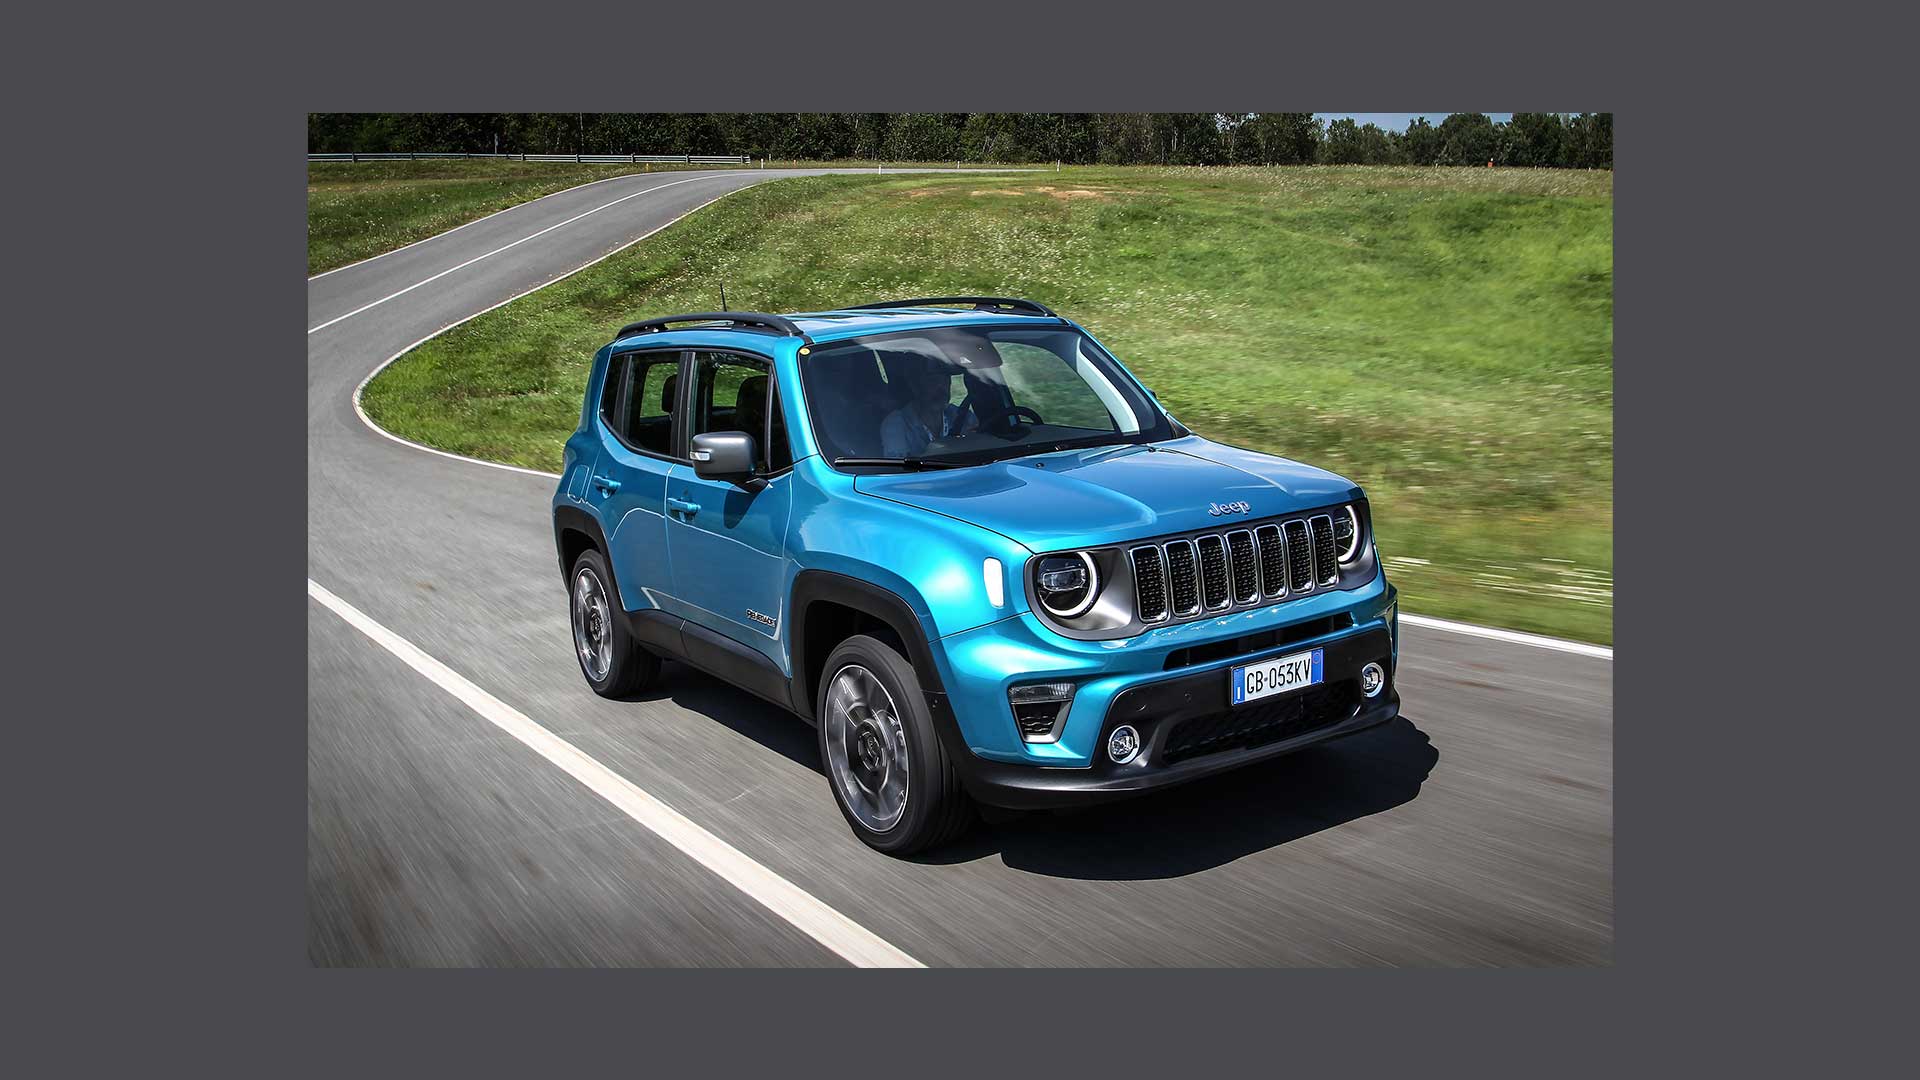 Photo of a Jeep Renegade on the track